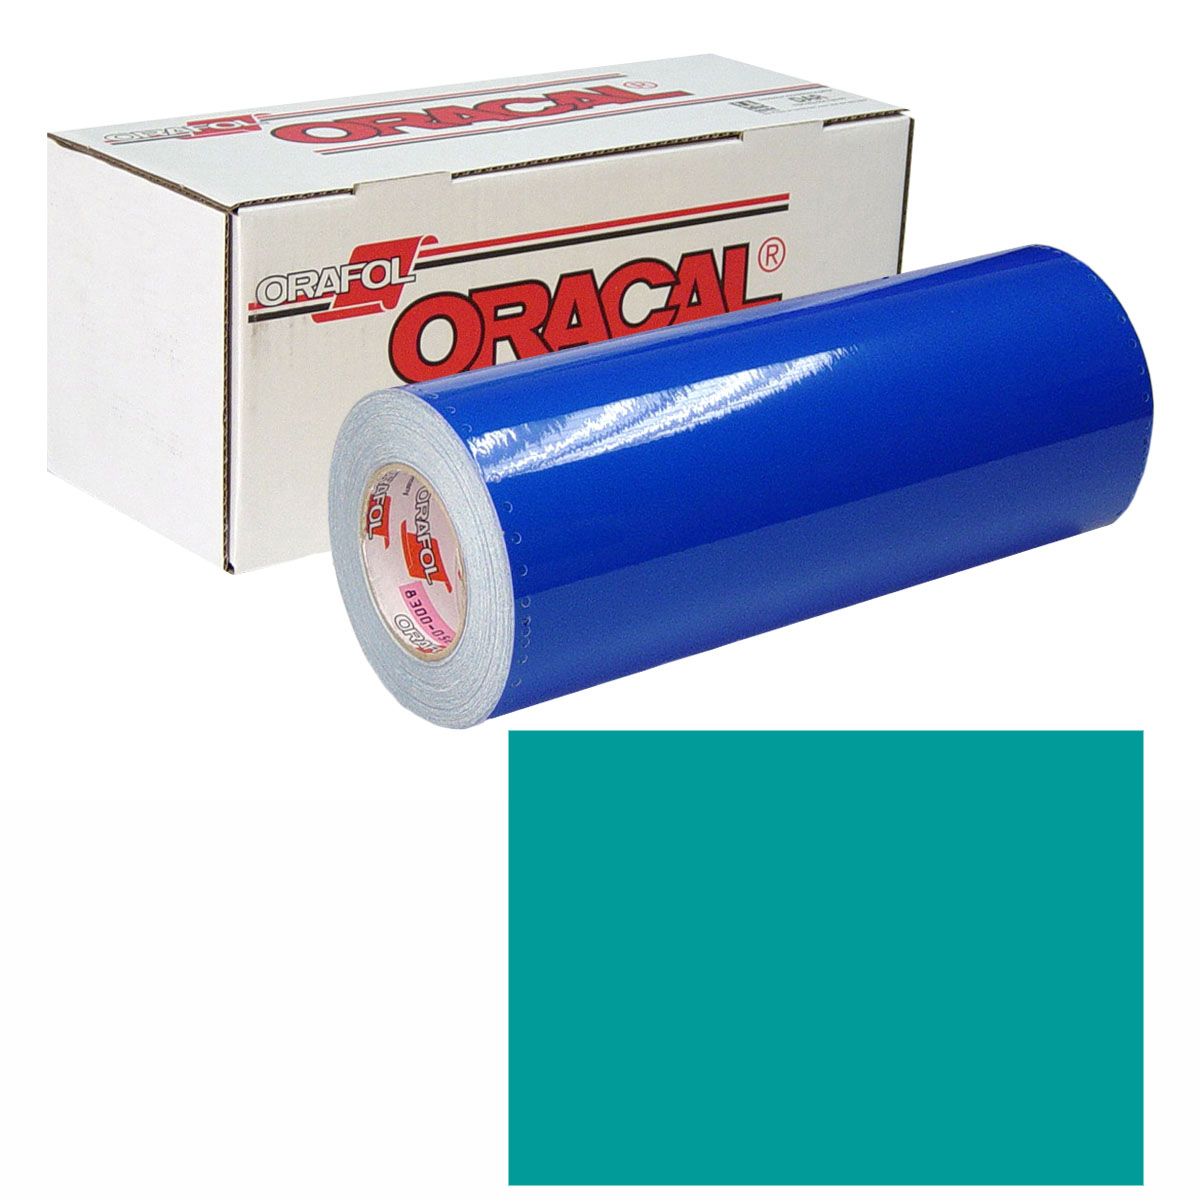 ORACAL 631 30in X 50yd 054 Turquoise